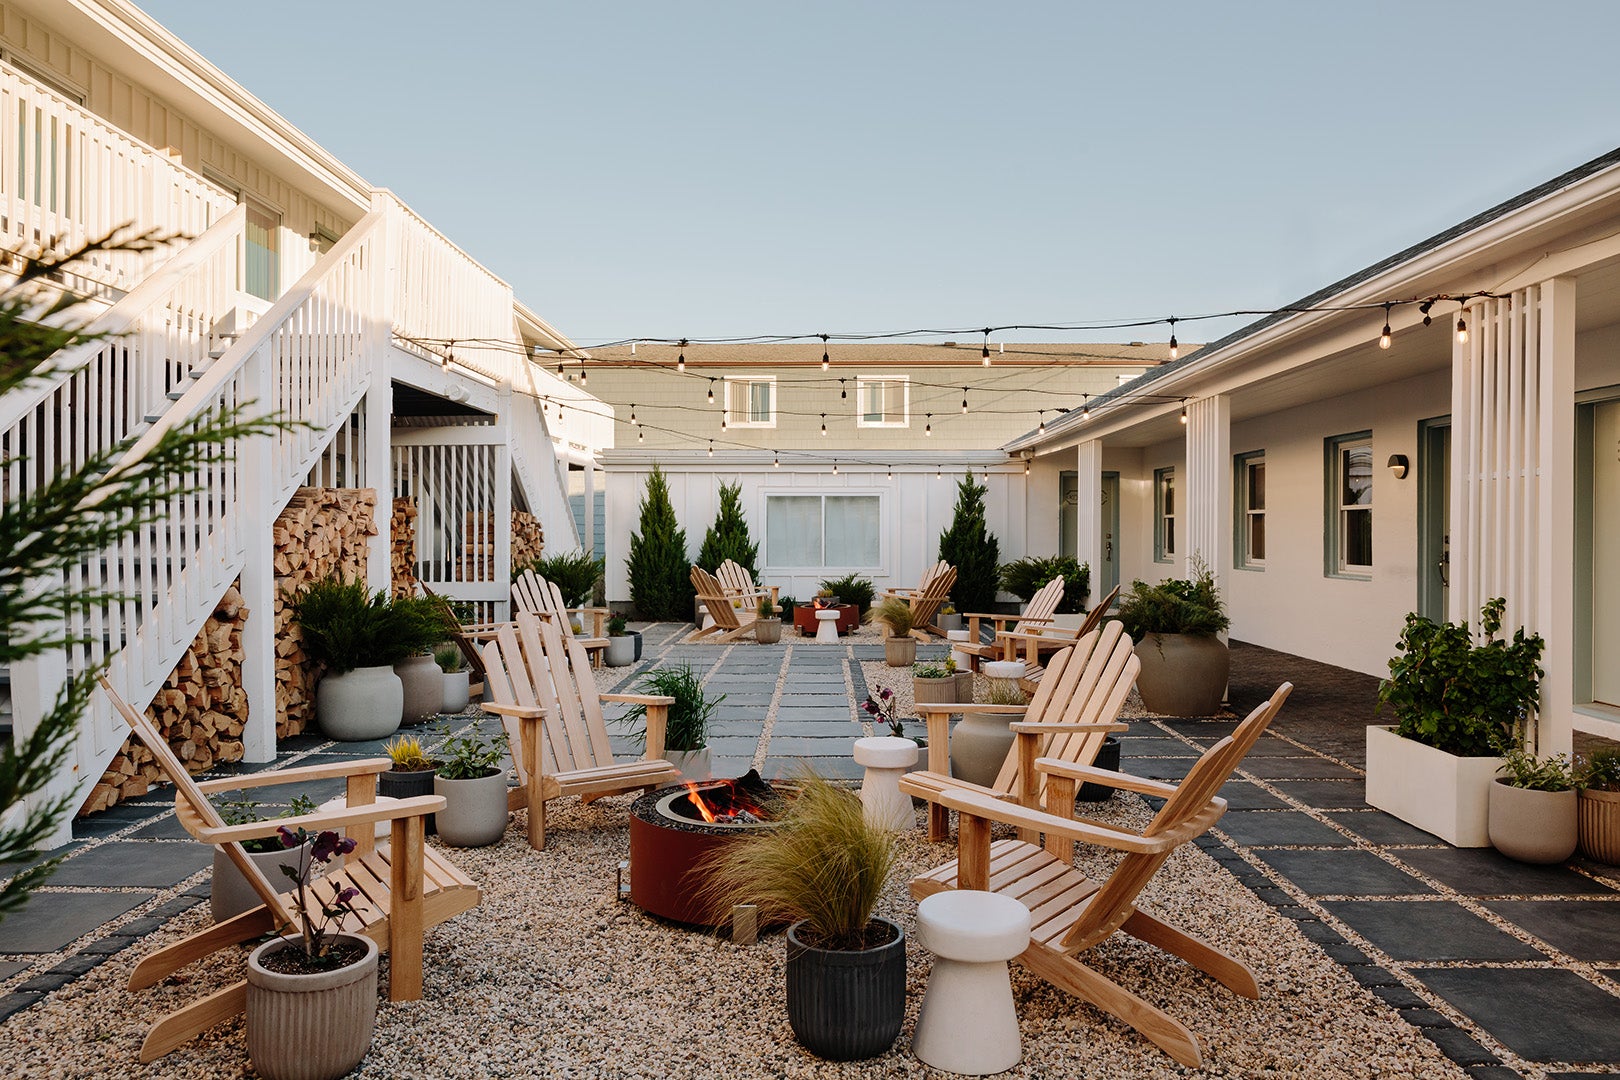 Motel outdoor courtyard with chairs